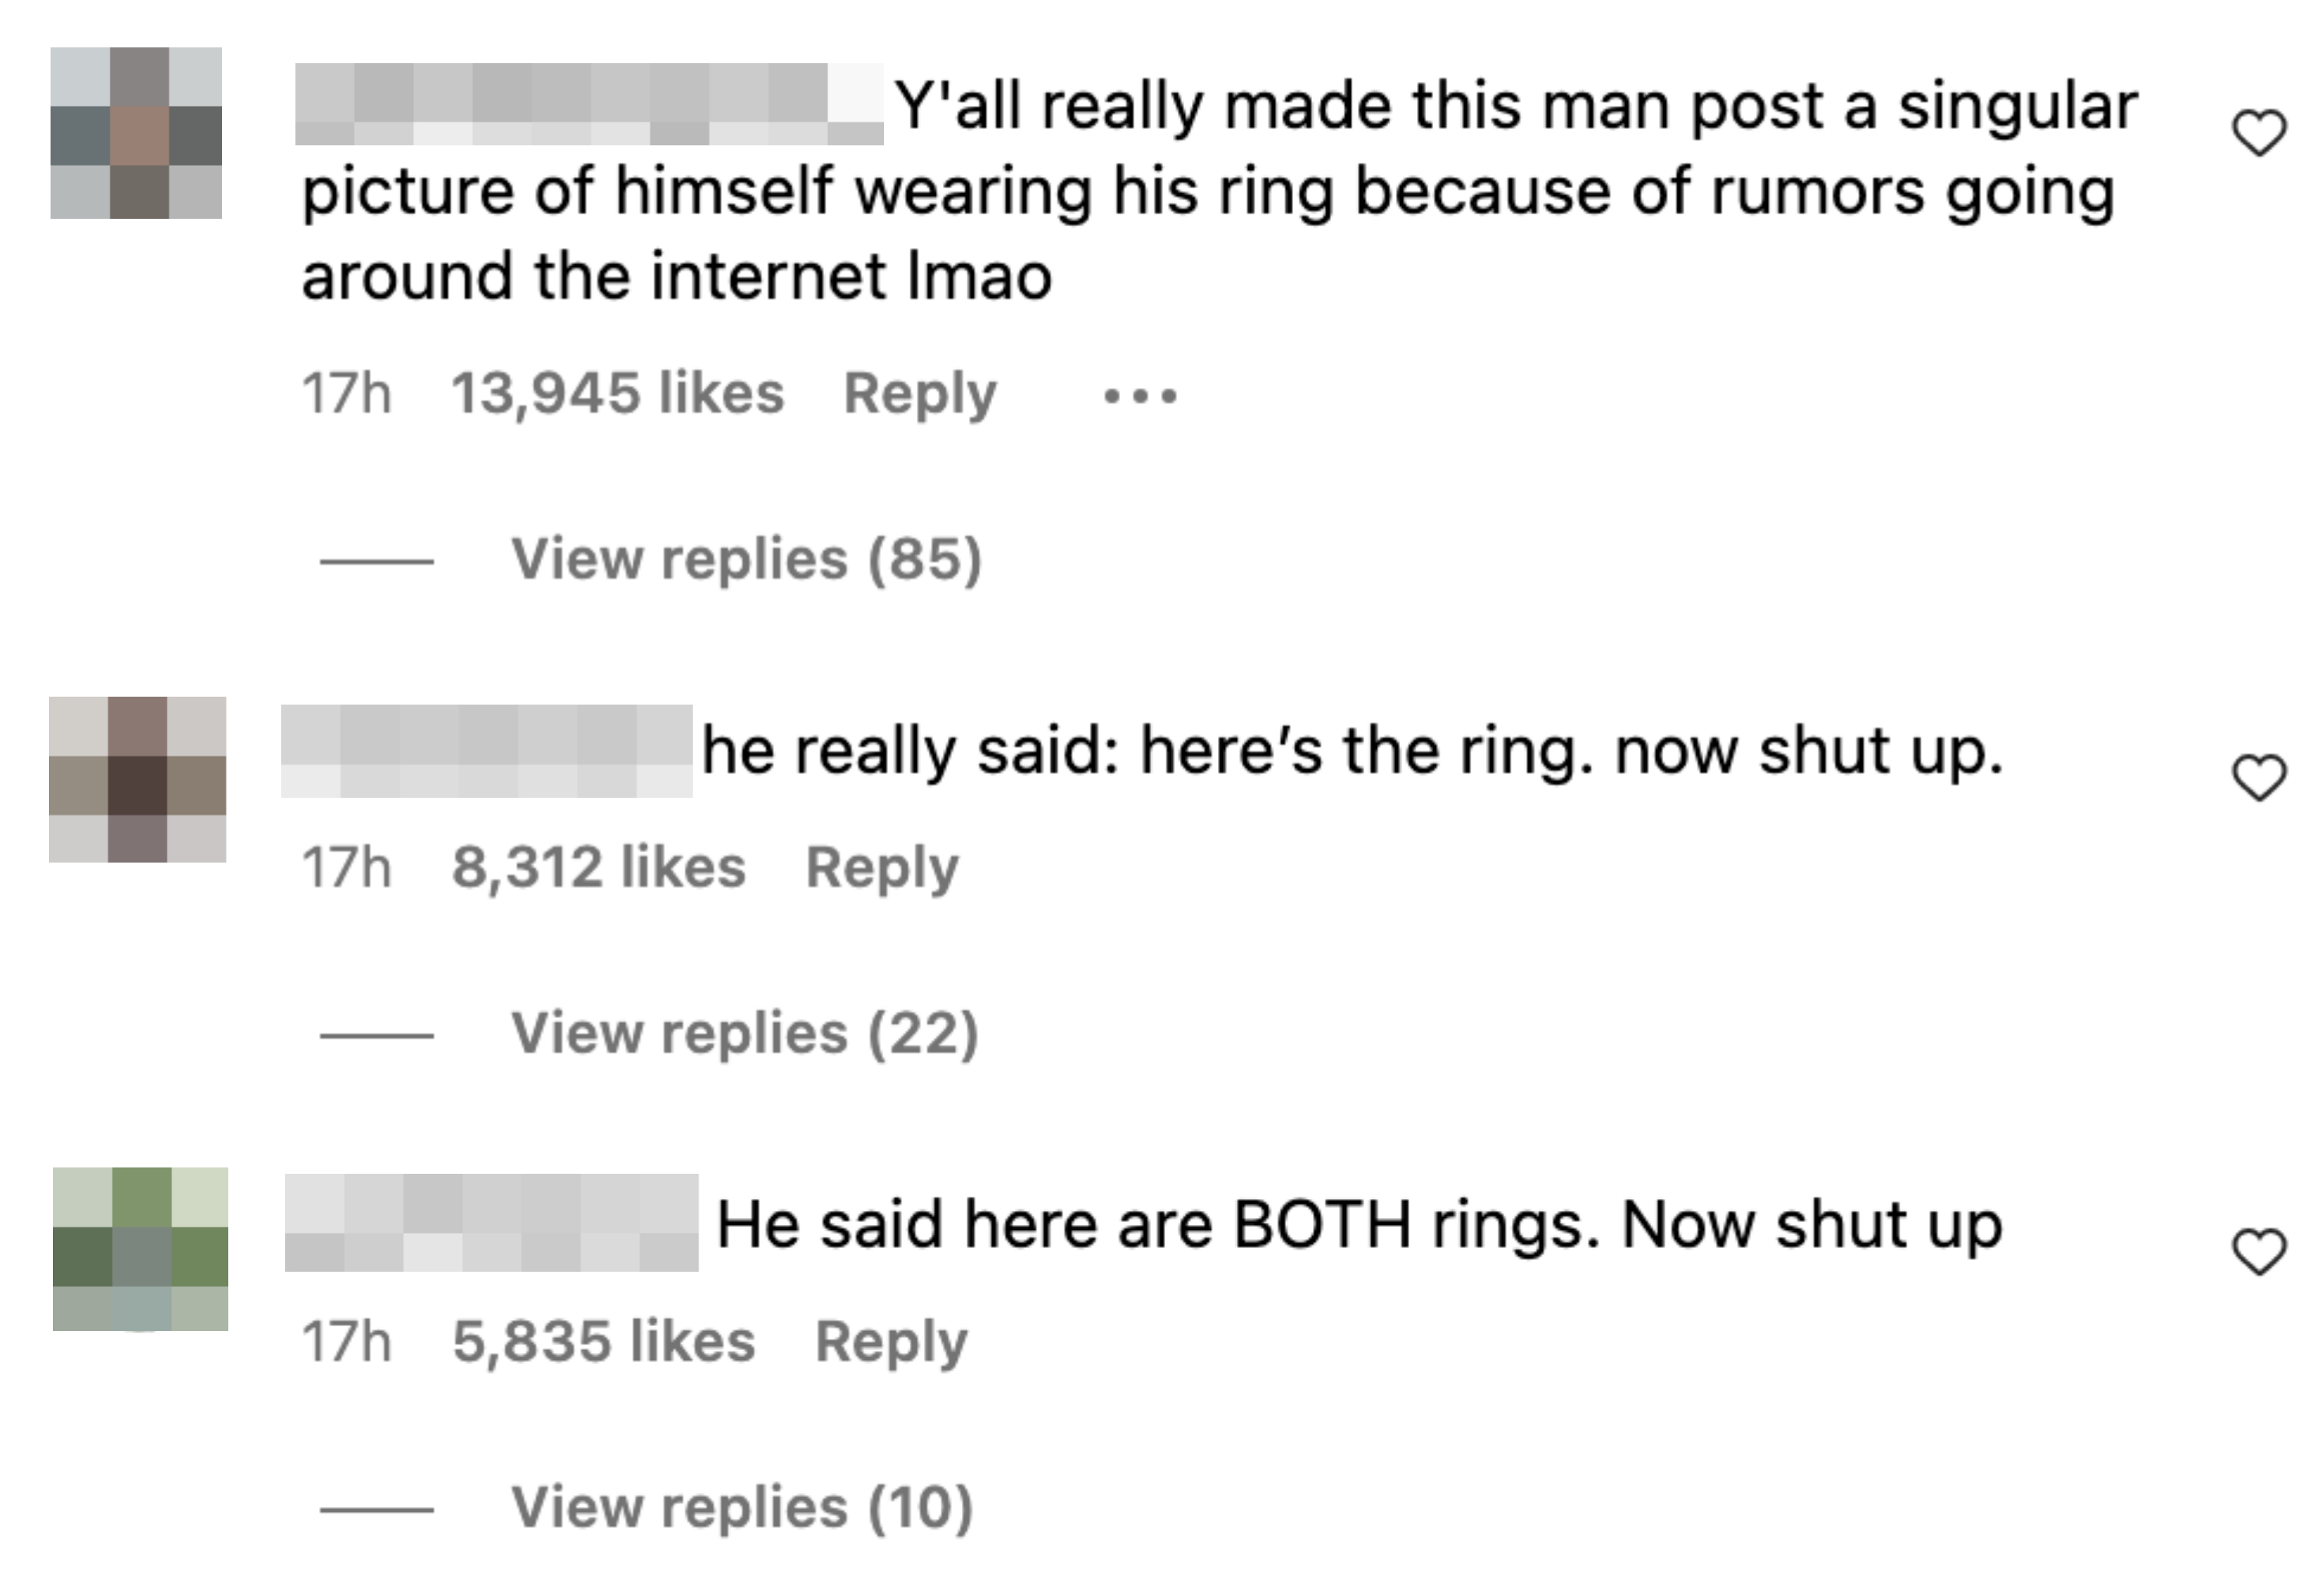 comments about him wearing the ring including, &quot;he really said: here&#x27;s the ring. now shut up&quot;